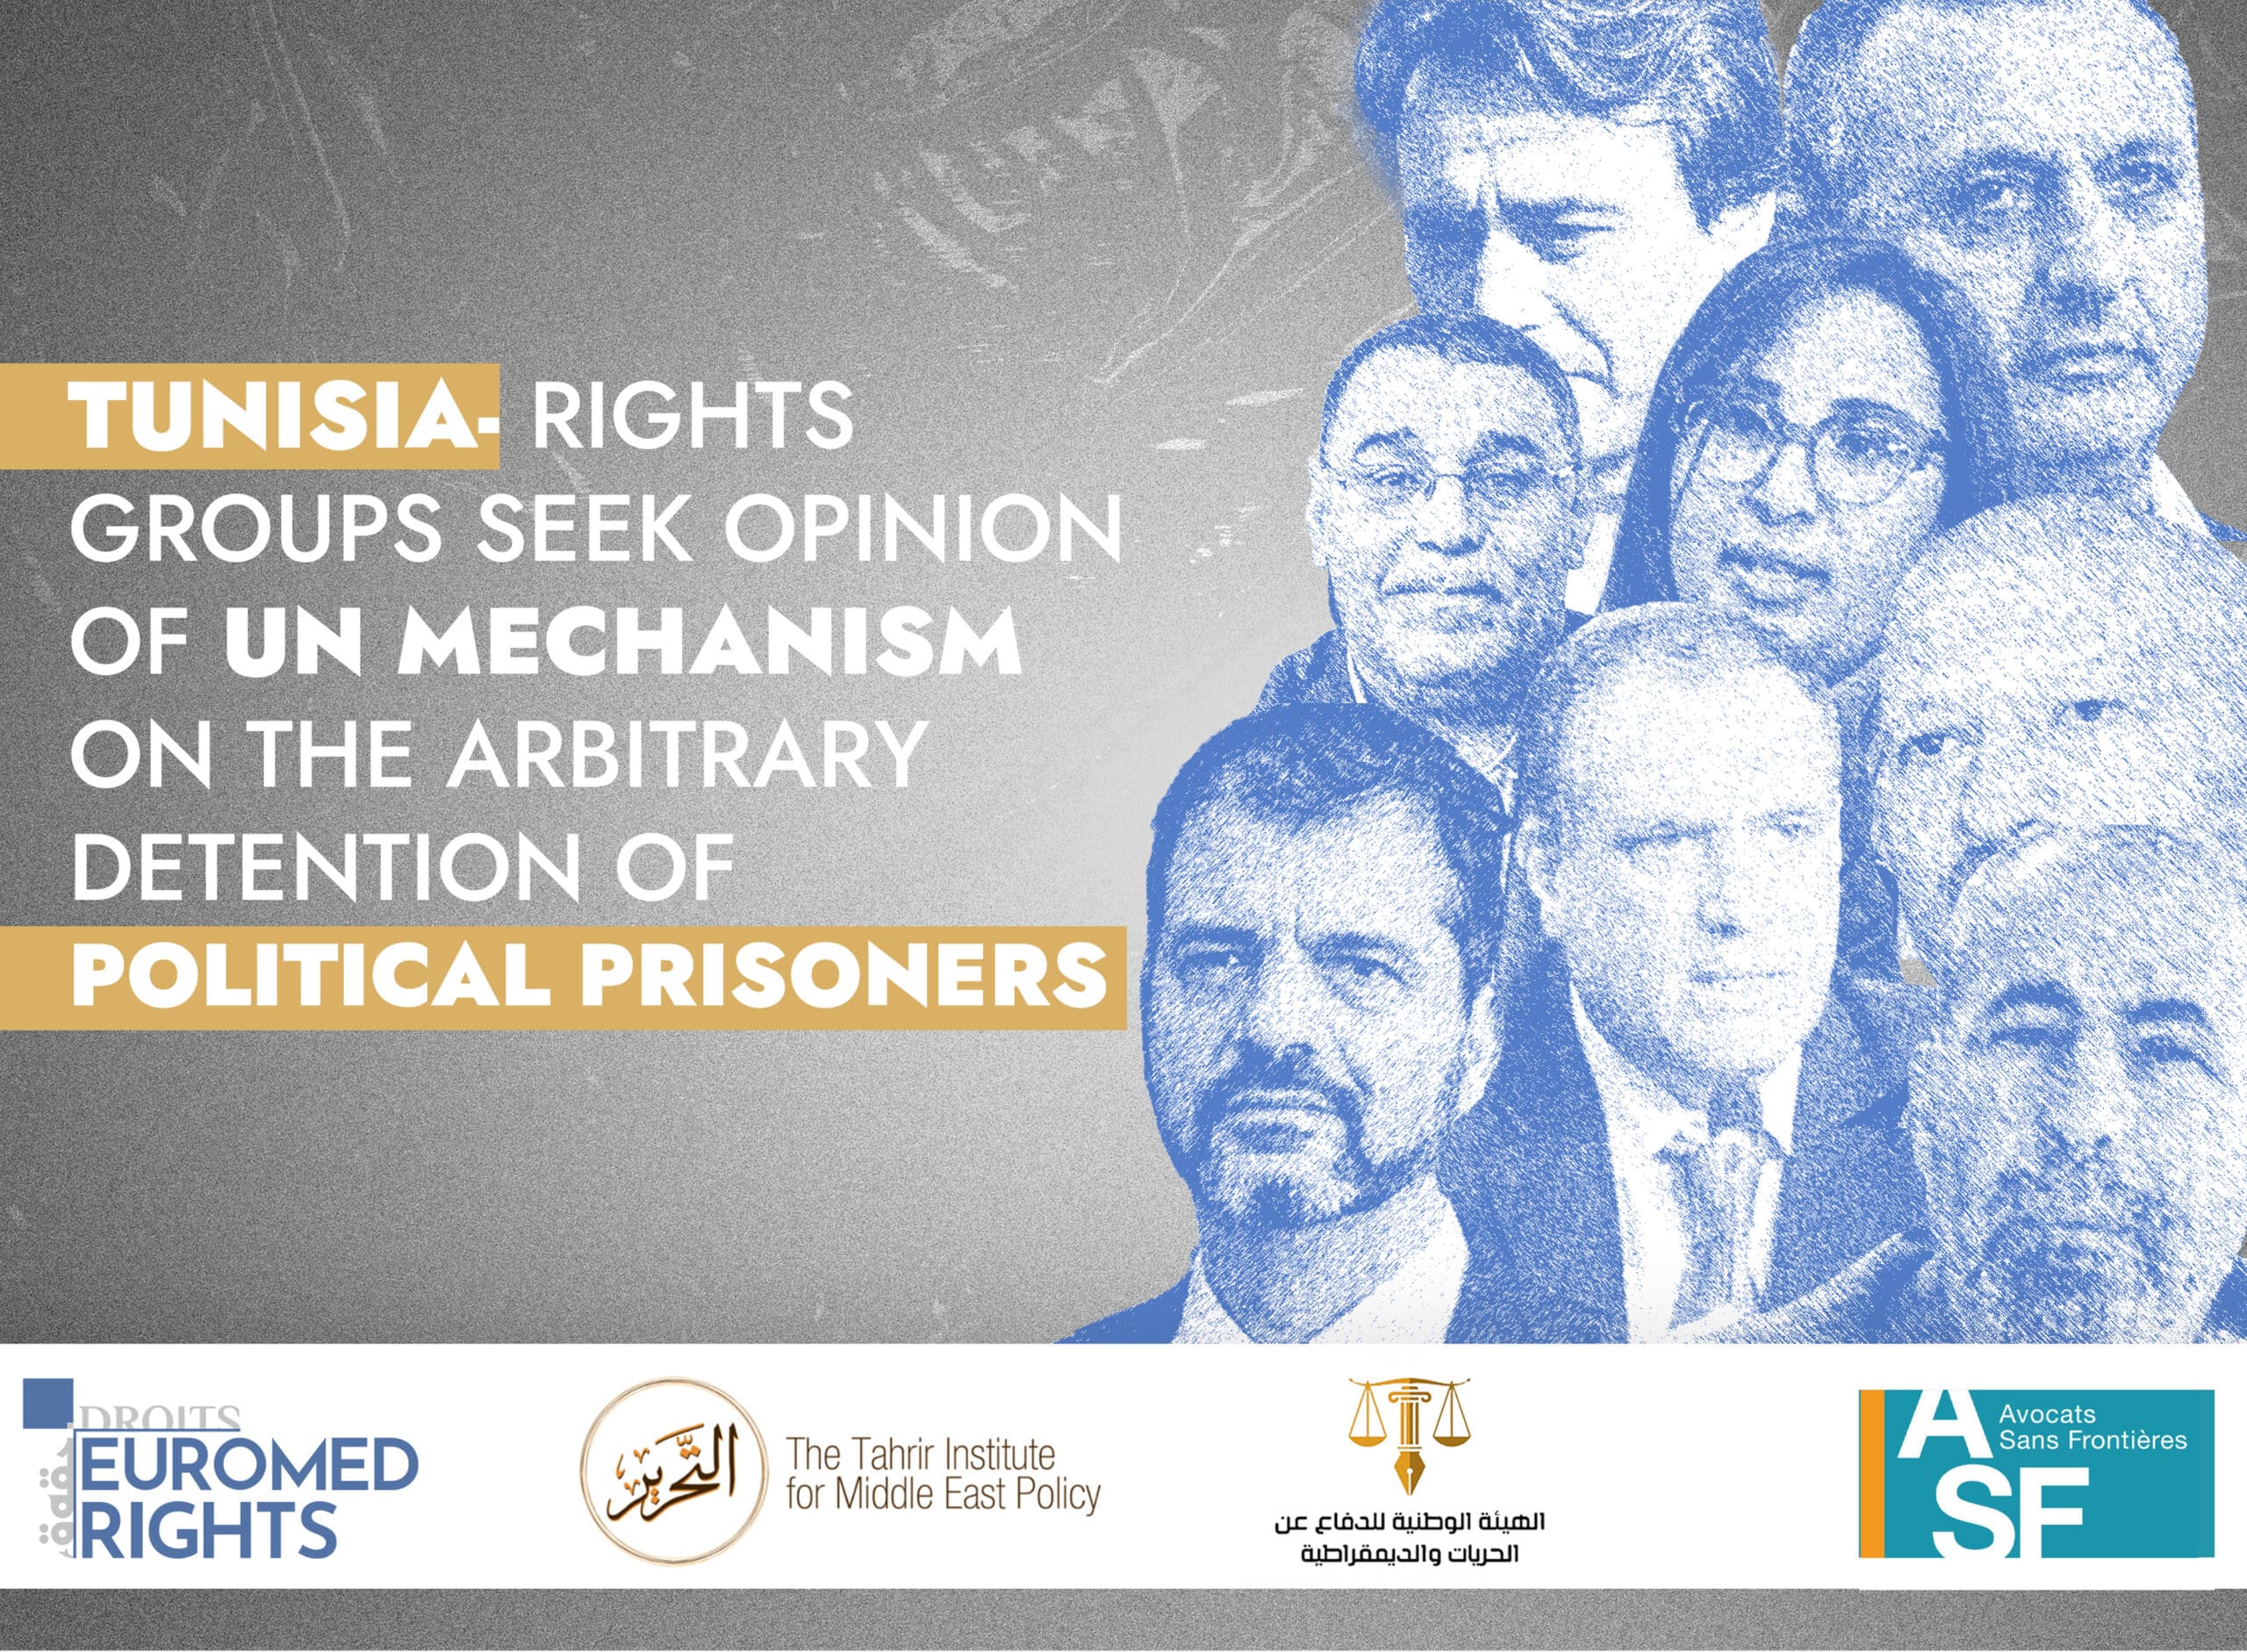 Tunisia- Rights Groups seek opinion of UN mechanism on the arbitrary detention of political prisoners and call on the immediate release of all detainees